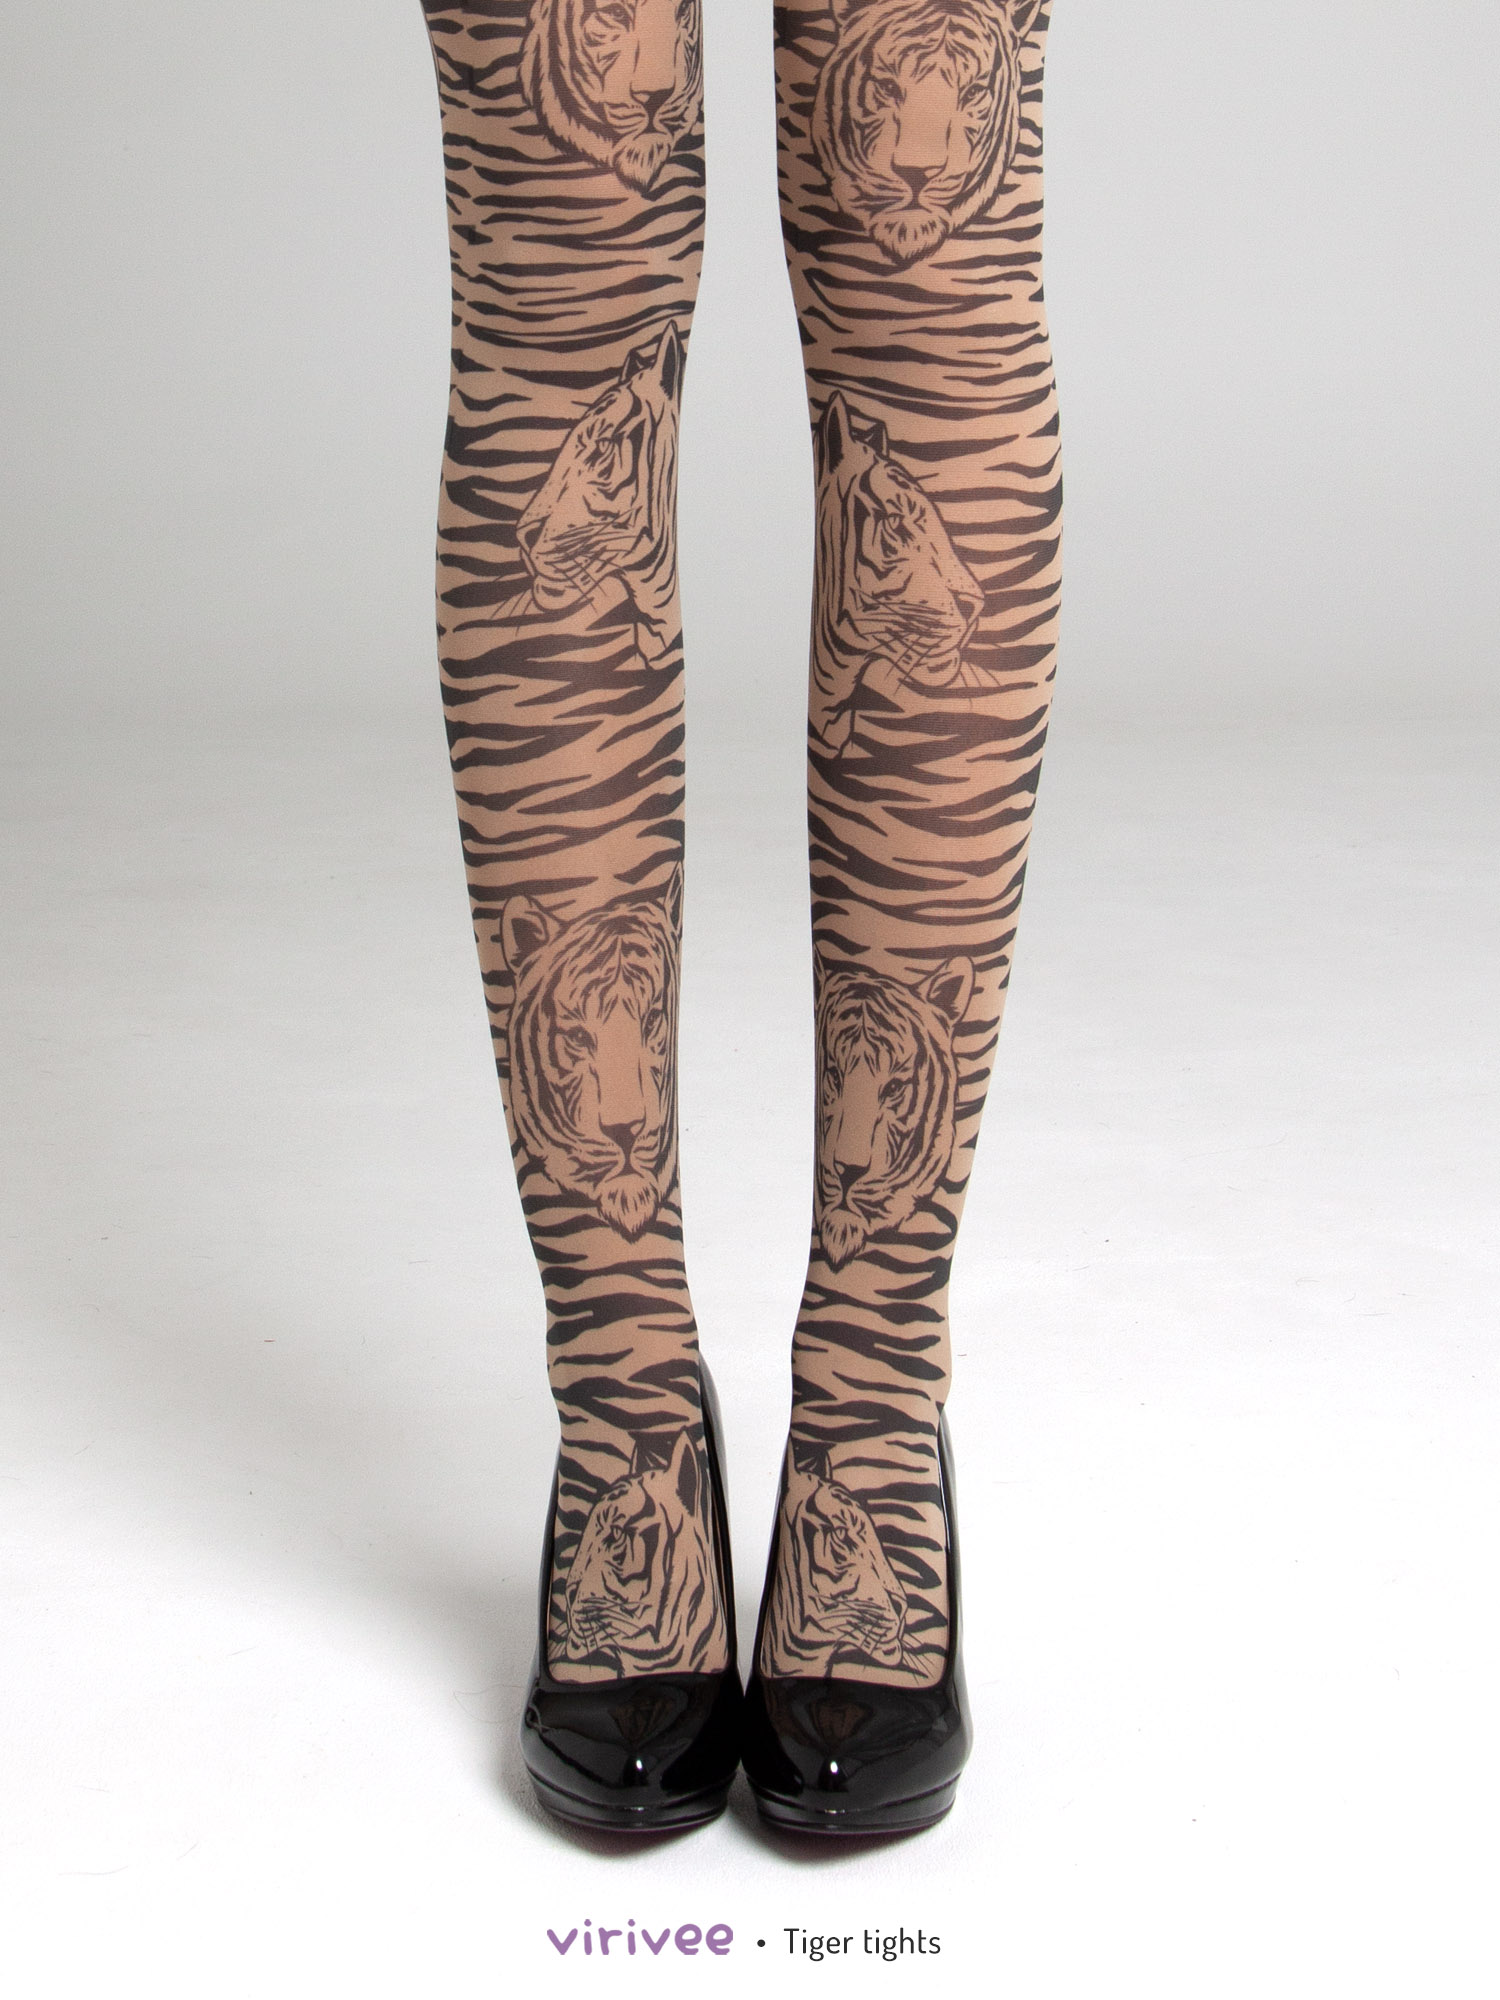 Tiger tights with stripes